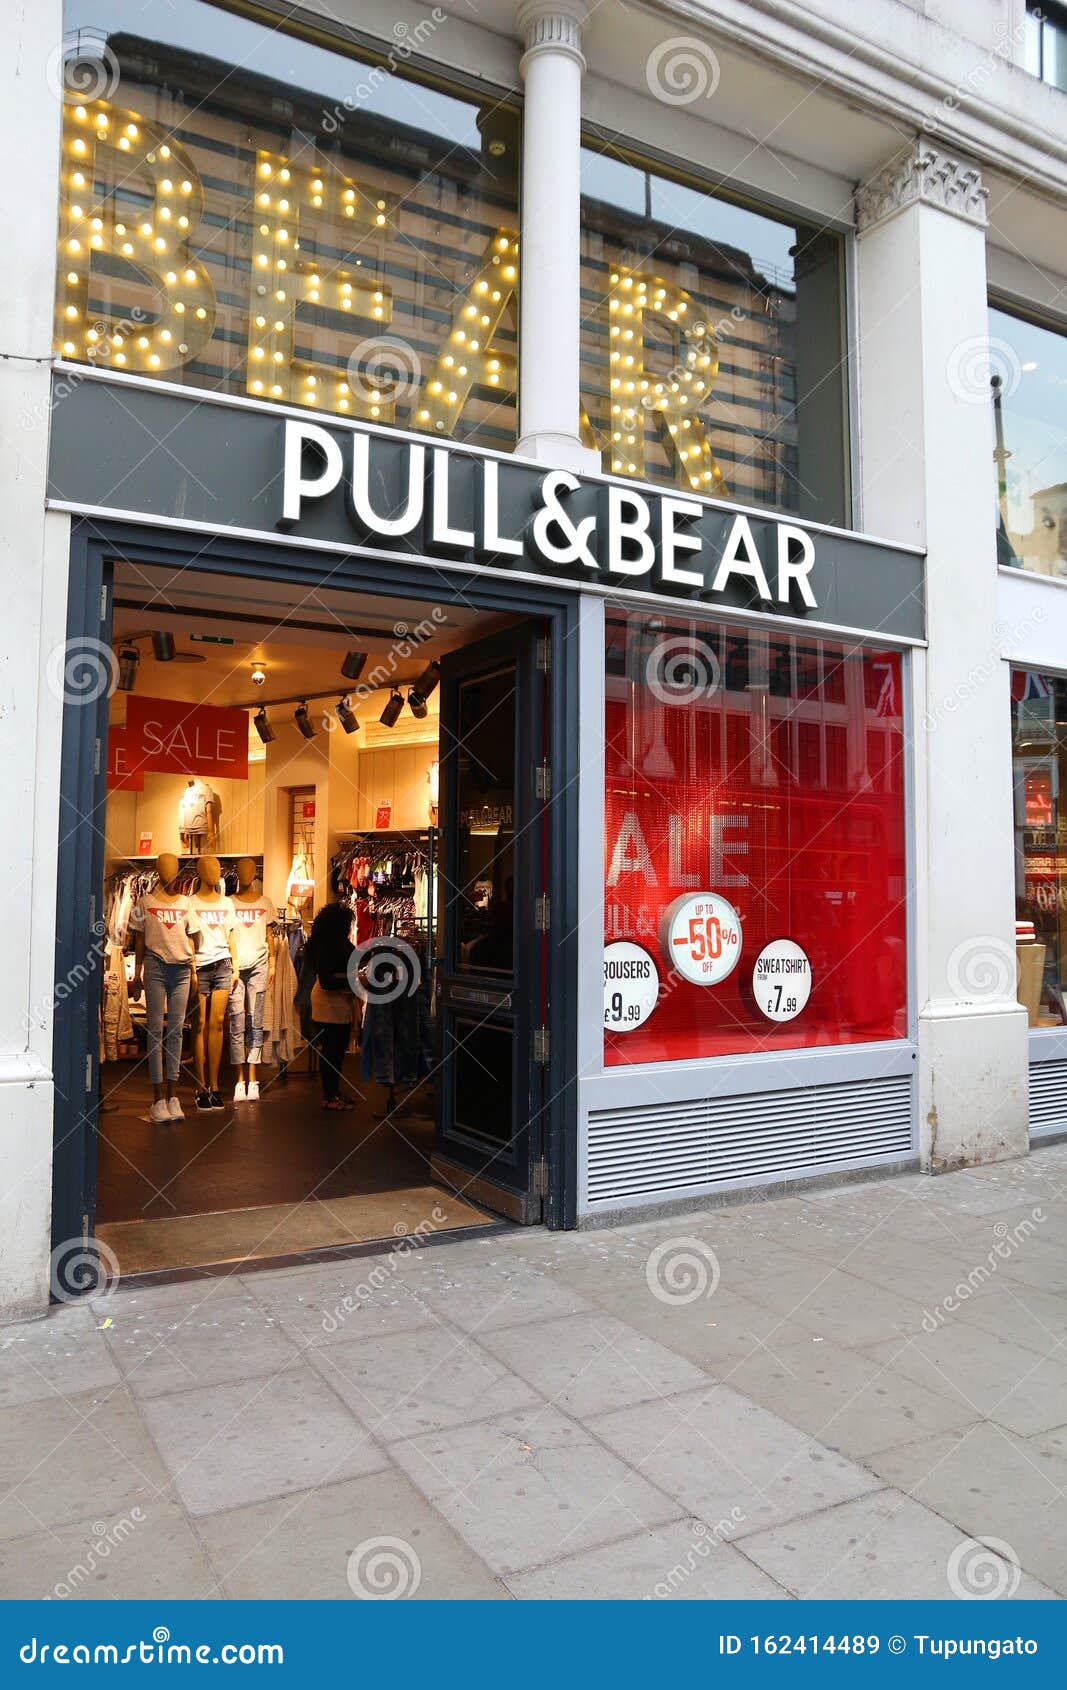 Pull & Bear Fashion Store Editorial Stock Image - Image of pull, united:  162414489